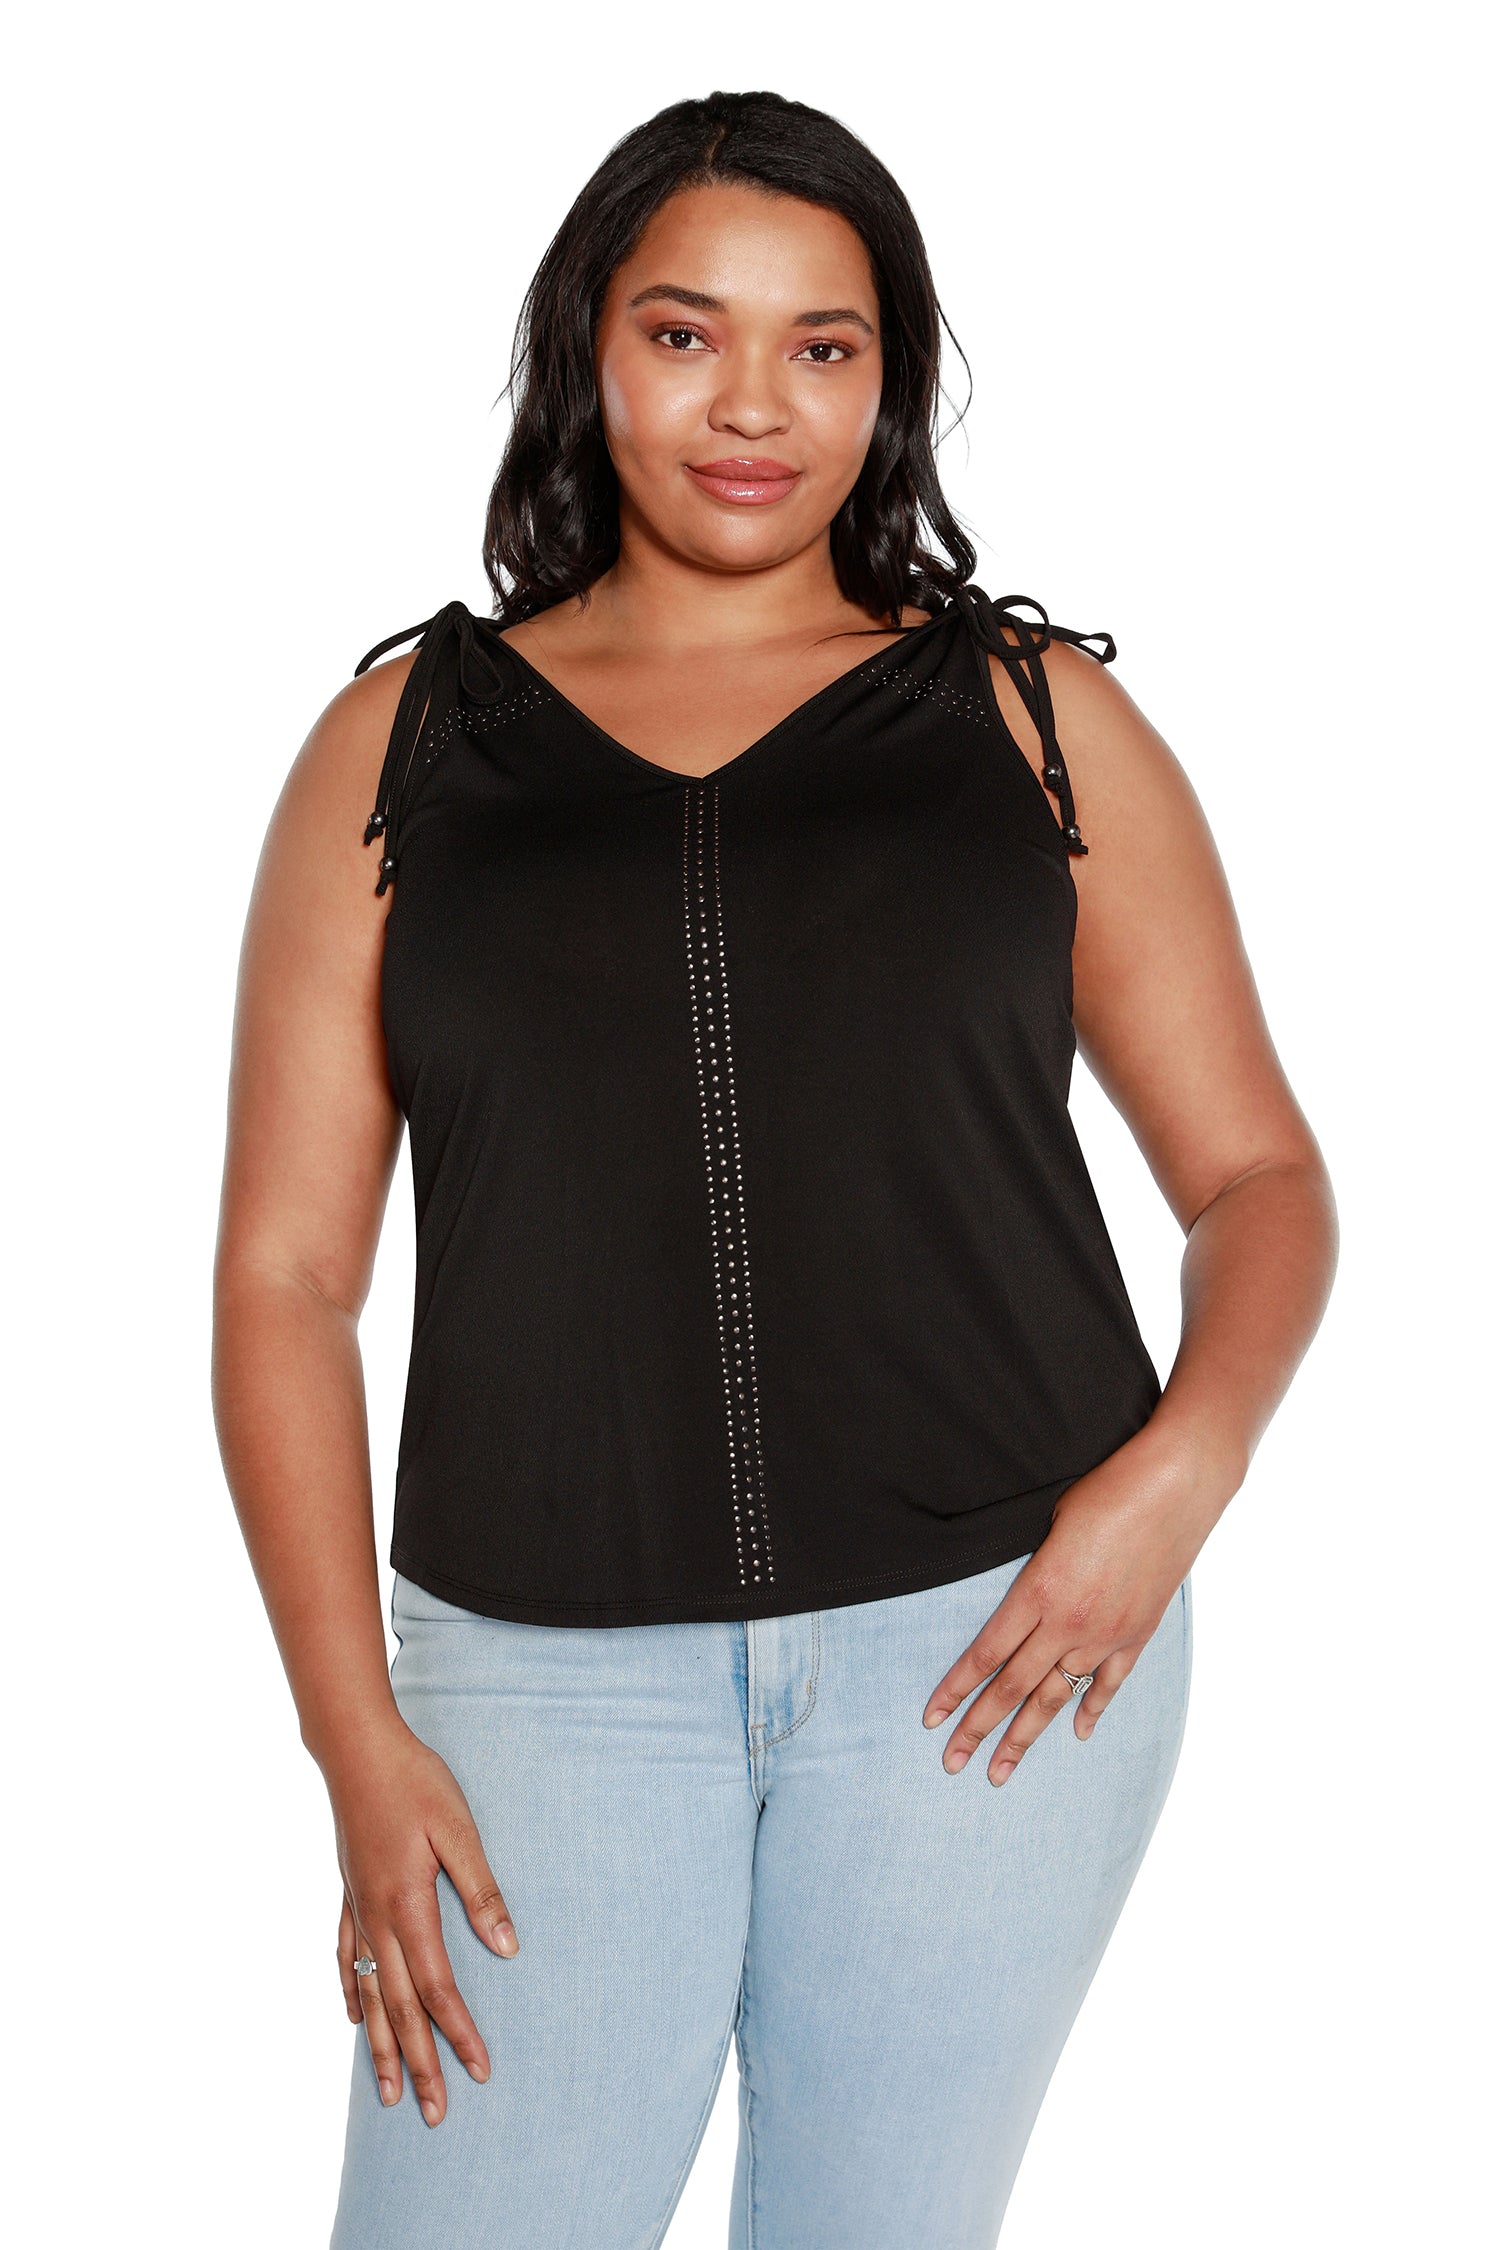 Women’s Crepe Jersey Halter Tank with Nailheads and Shoulder Ties | Curvy